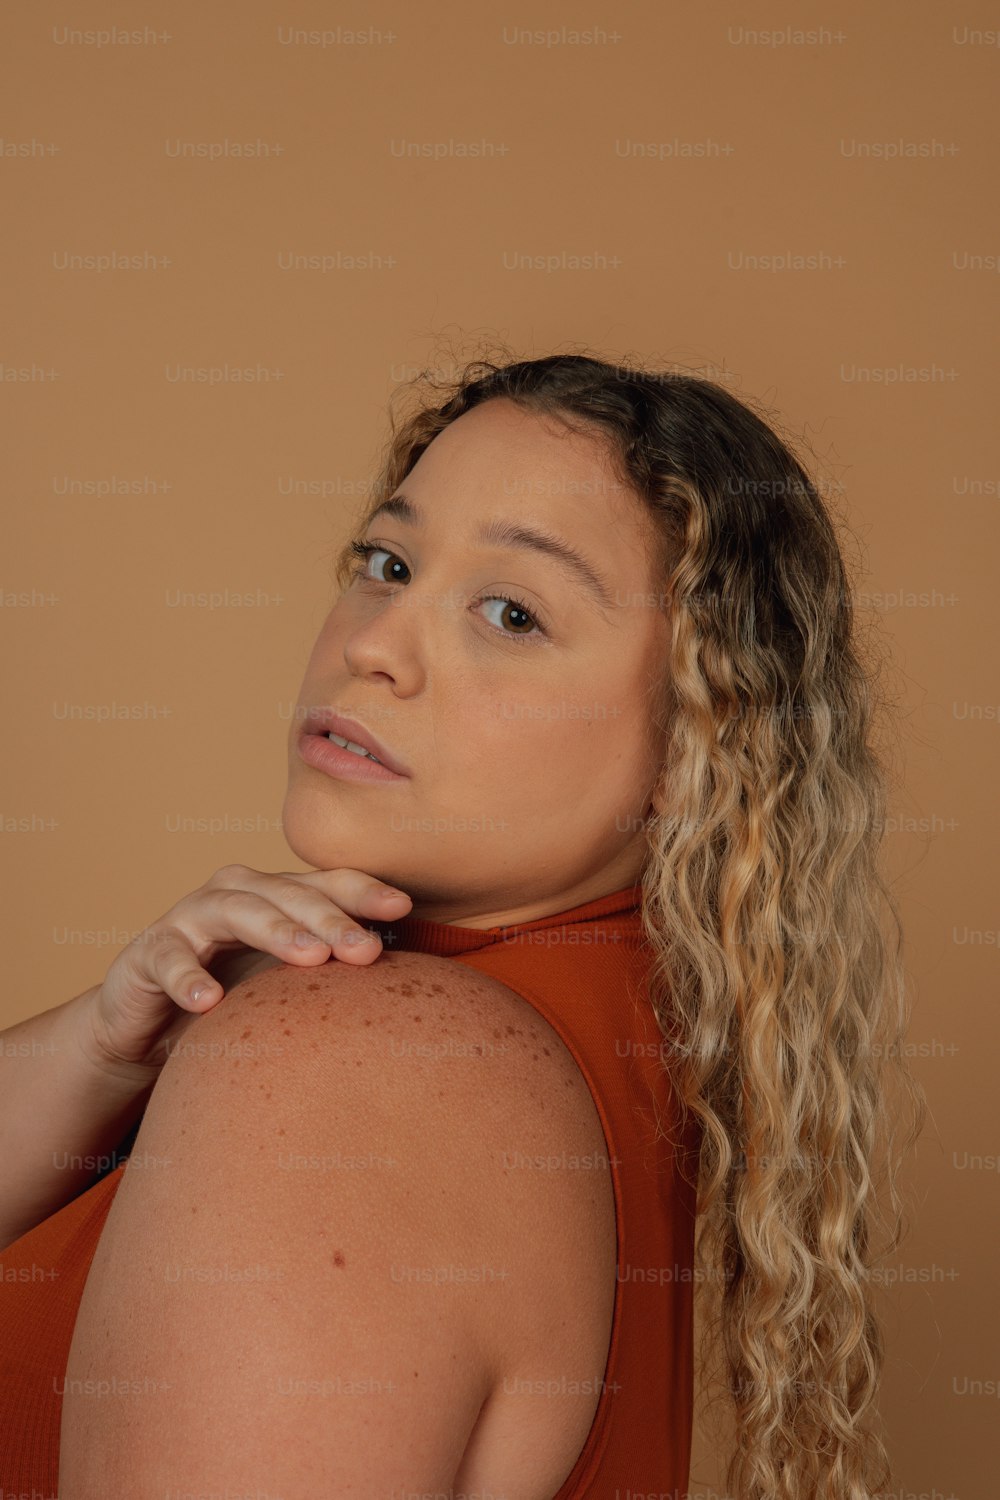 a woman with curly hair wearing an orange top